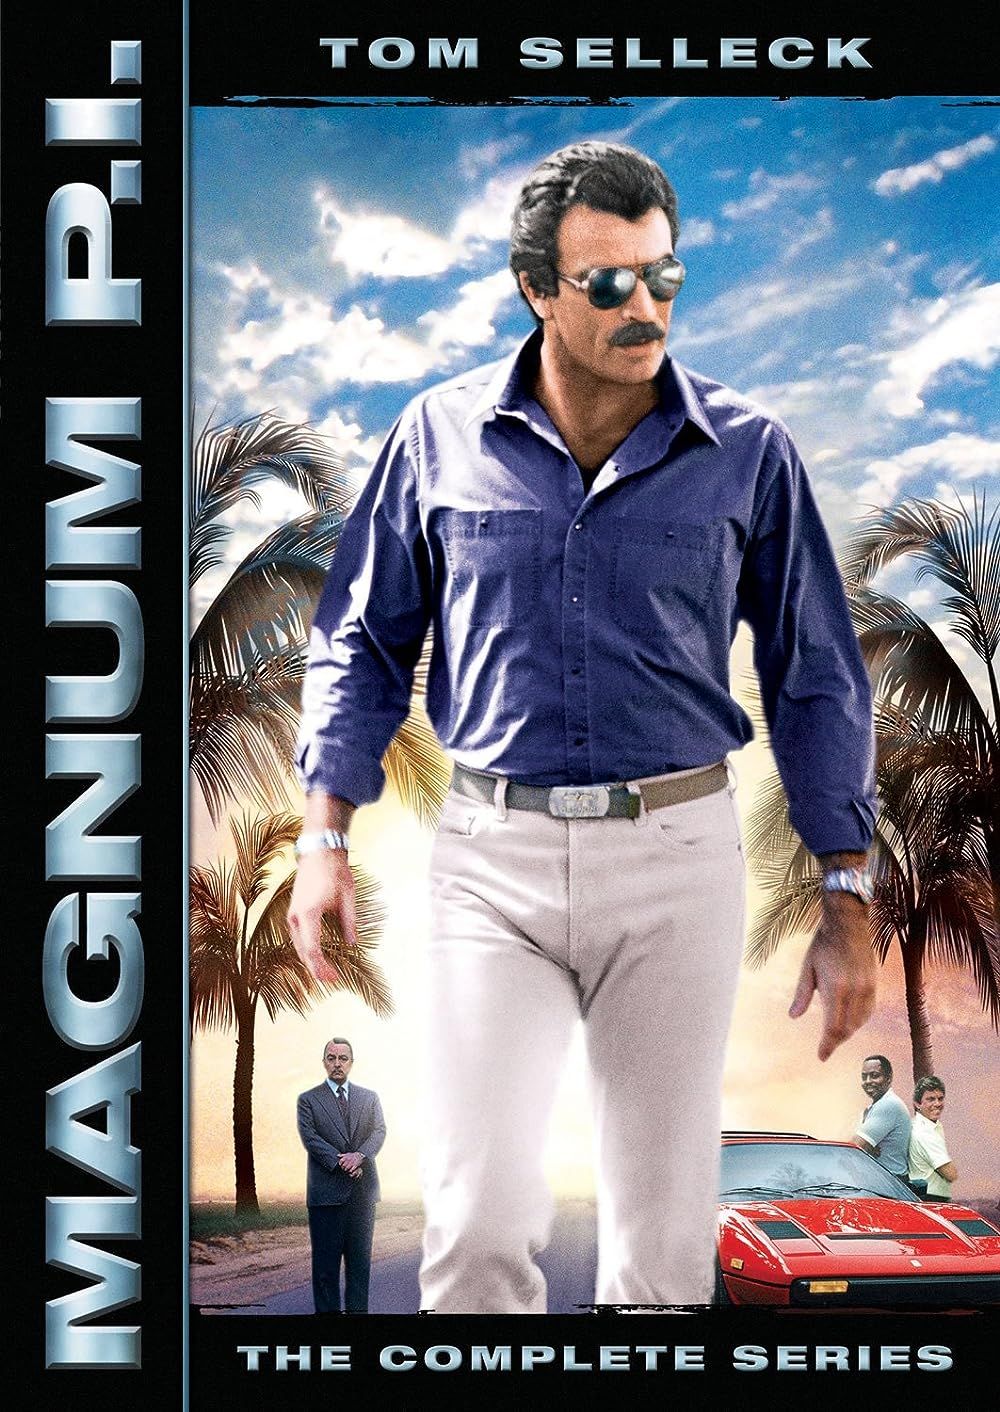 'A Sh-tty Title': Tom Selleck Reflects on Magnum P.I. Title in New Memoir